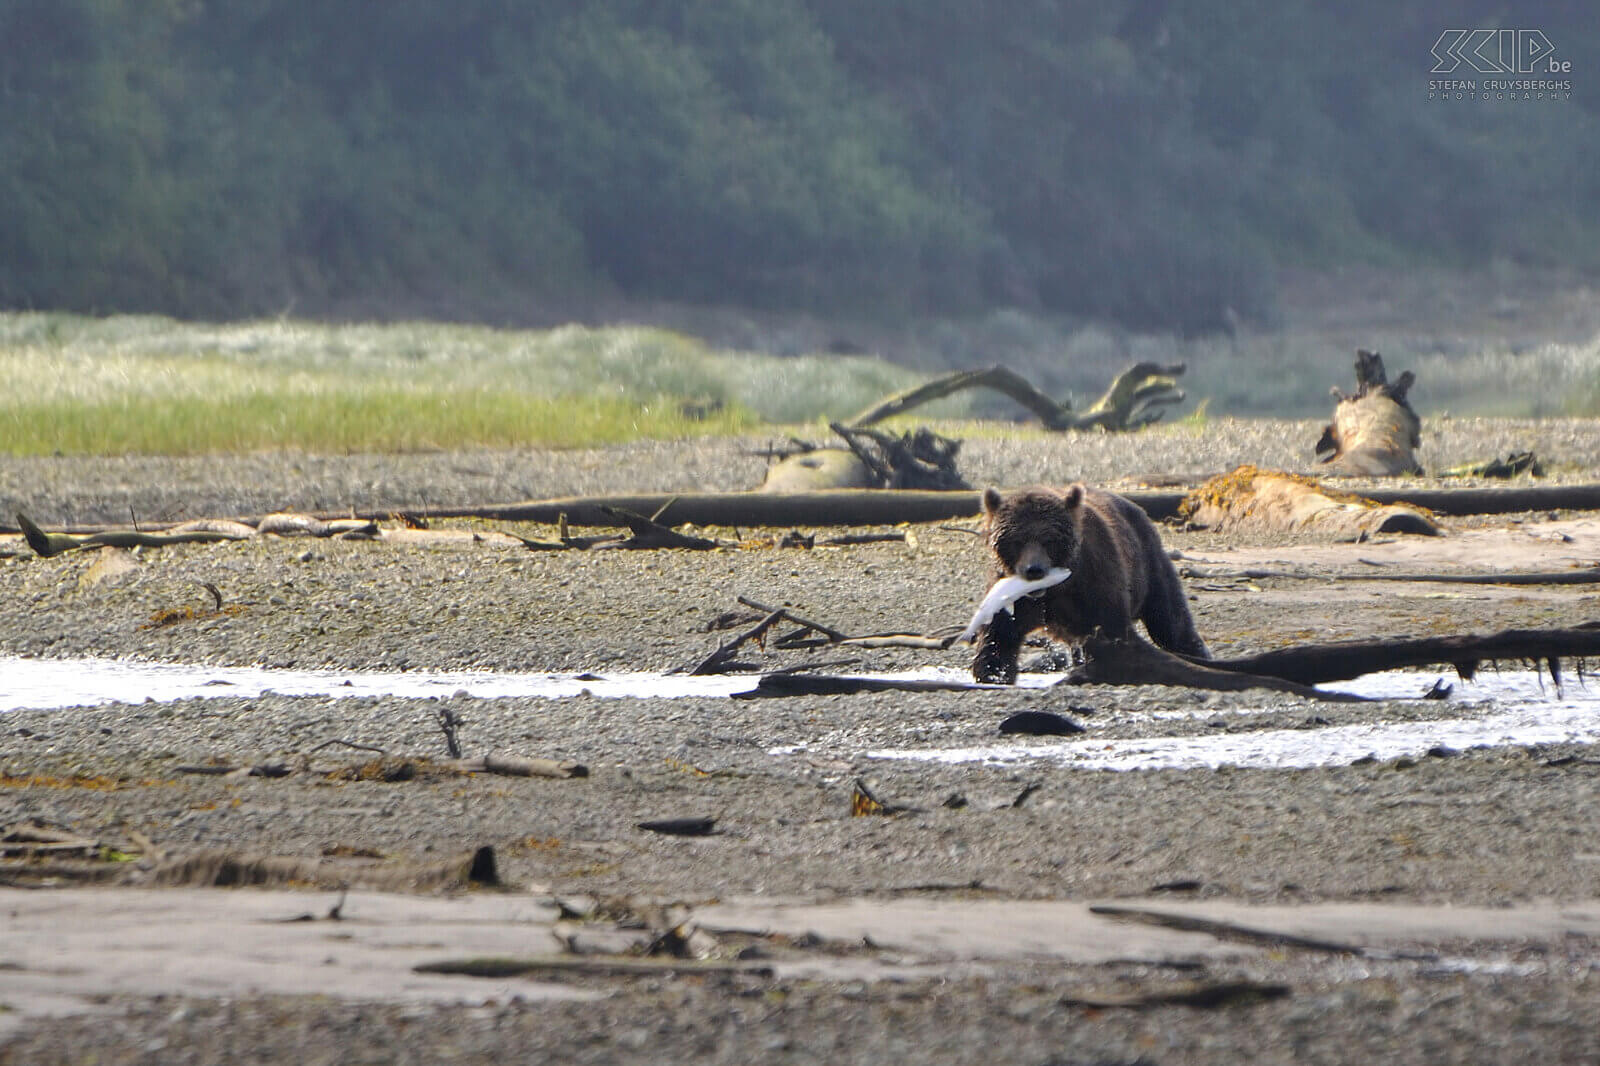 Knight Inlet - Brown bear The brown bear catches a salmon Stefan Cruysberghs